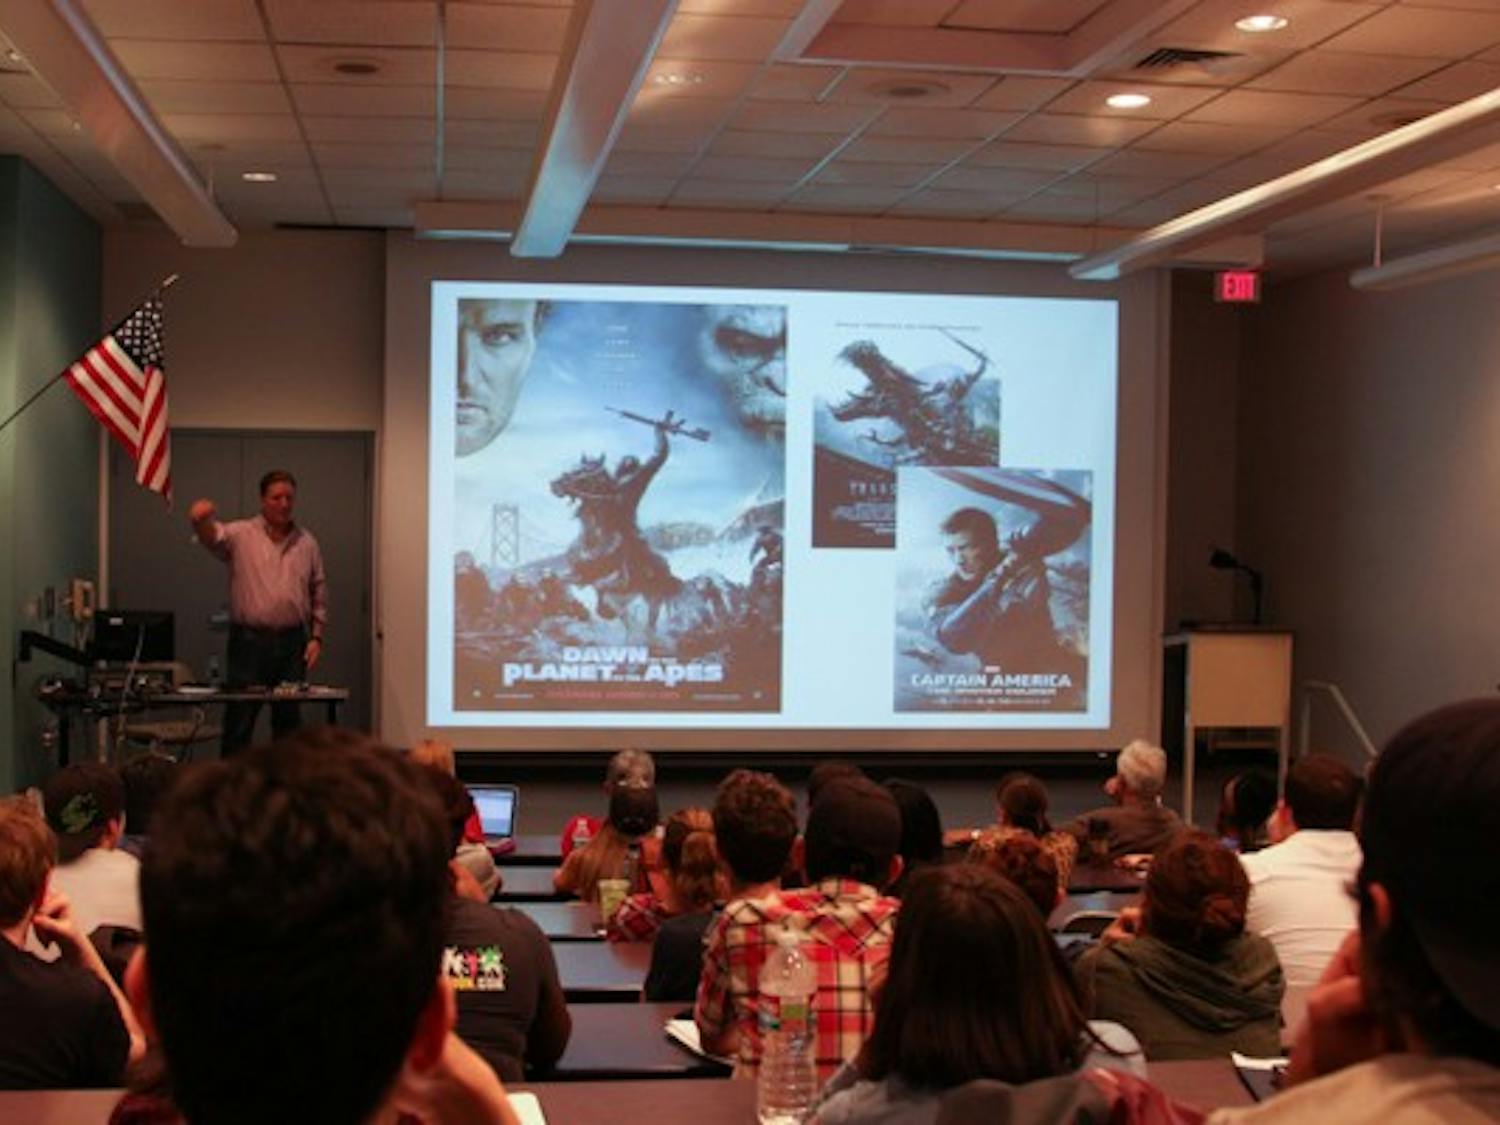 Bunnygraph Entertainment CEO John D. Heinsen shows the similarities between Hollywood movie posters during his presentation on transmedia at the Durham Language and Literature building on Tuesday, Oct. 21st. (Photo by Daniel Kwon)